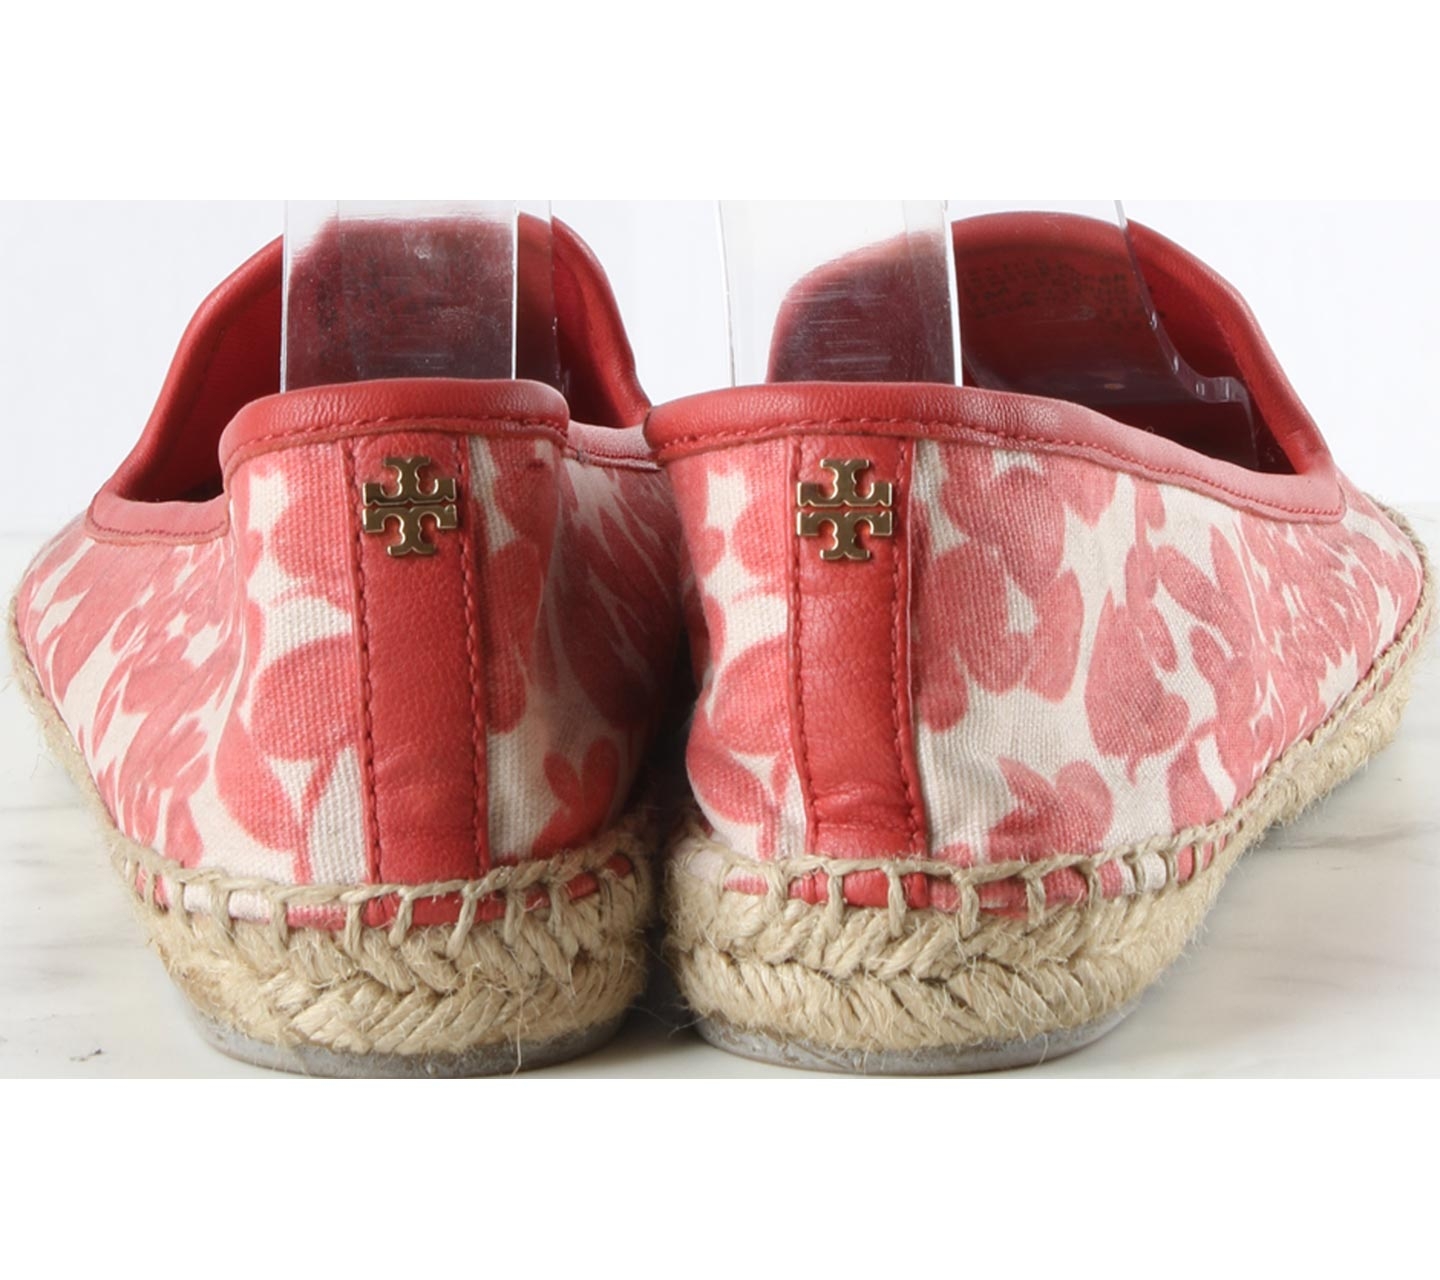 Tory Burch Red Floral Flats